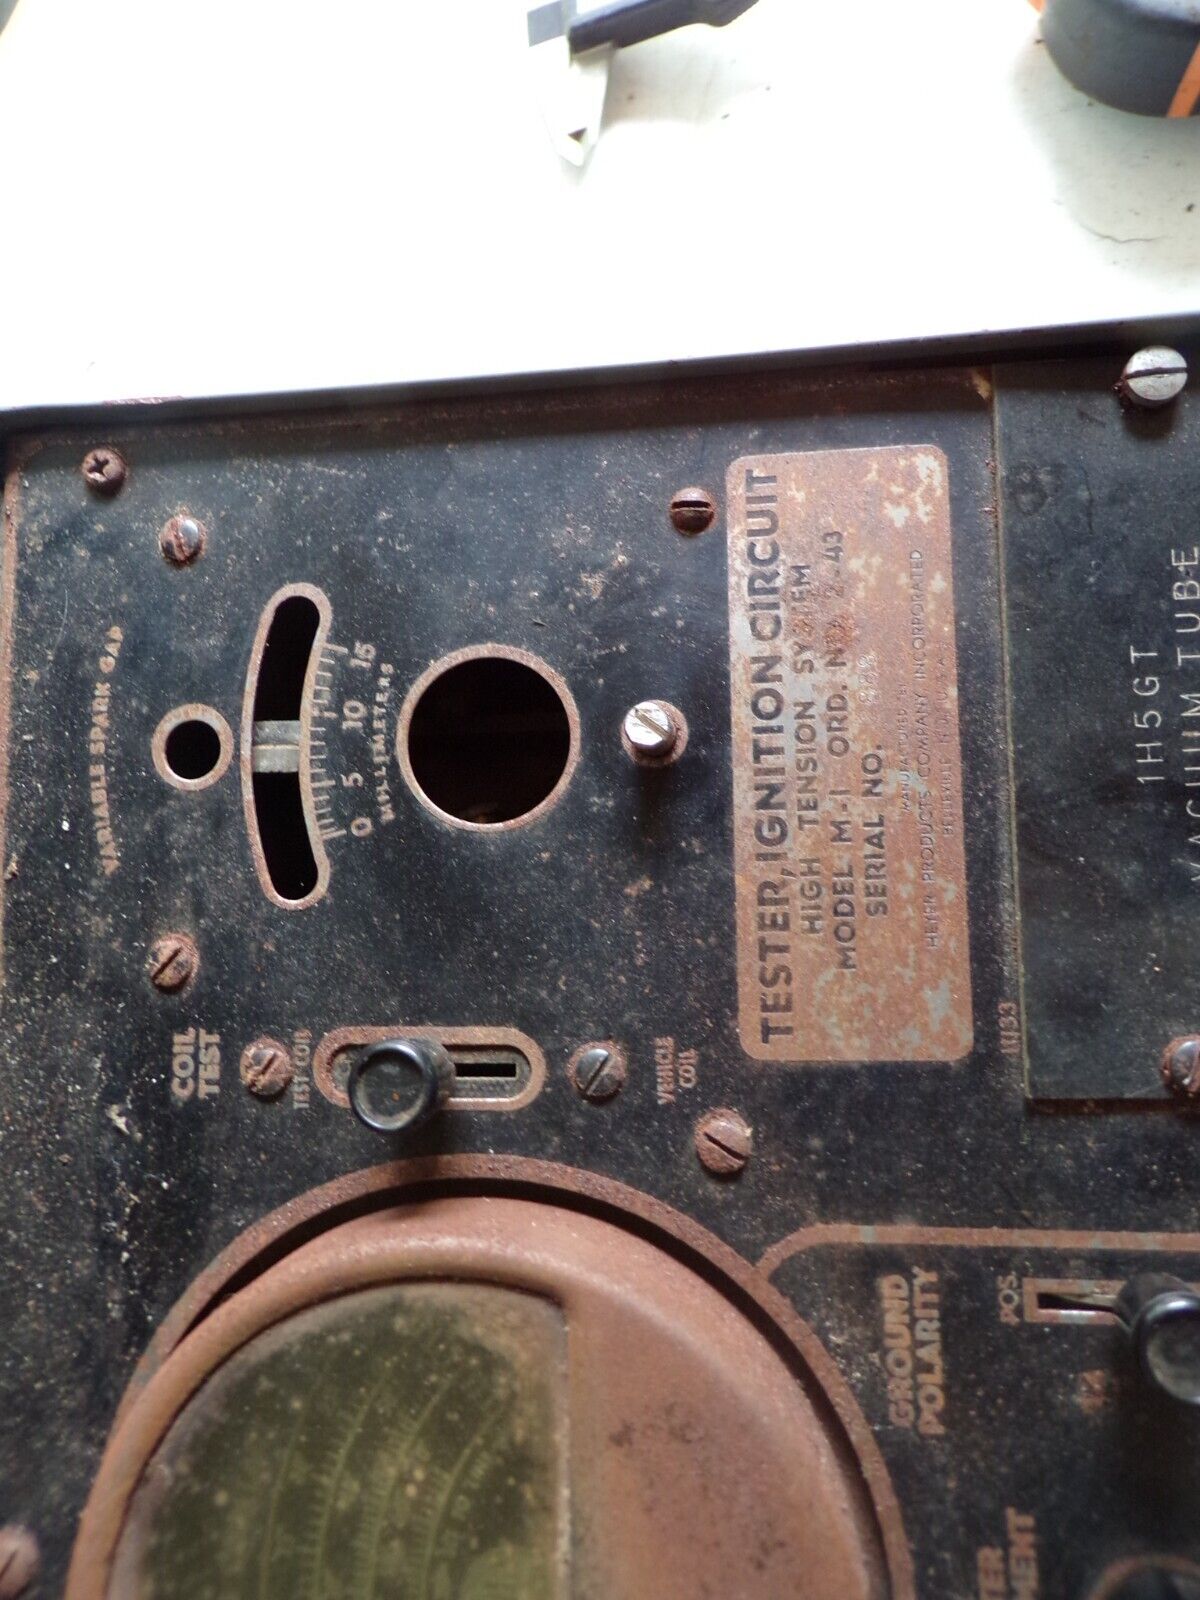 Tester Ignition Circuit Model M-1 2-43 Allen Militaria WWII Indochine 9922 Gallery Image 4